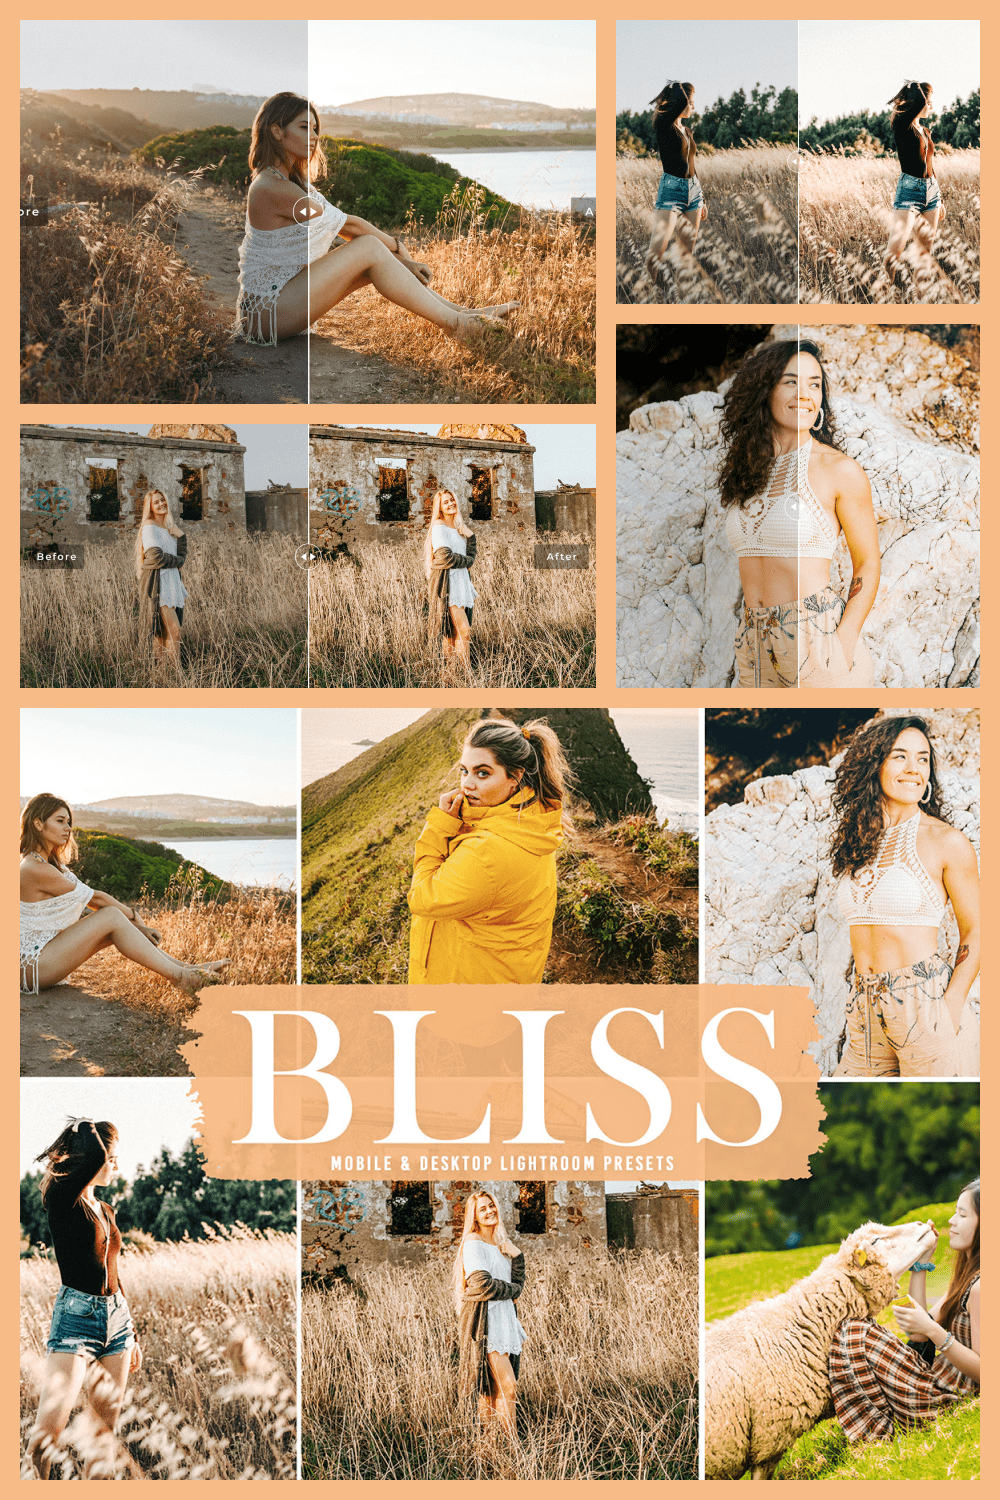 Bliss Mobile & Desktop Lightroom Presets will help you create unique and professional effects by adding tons of tones like bright, dreamy pink, shiny warm, candle oranges, soft yellows, glamour, rich and smooth tones for those who want to stand out from the crowd.